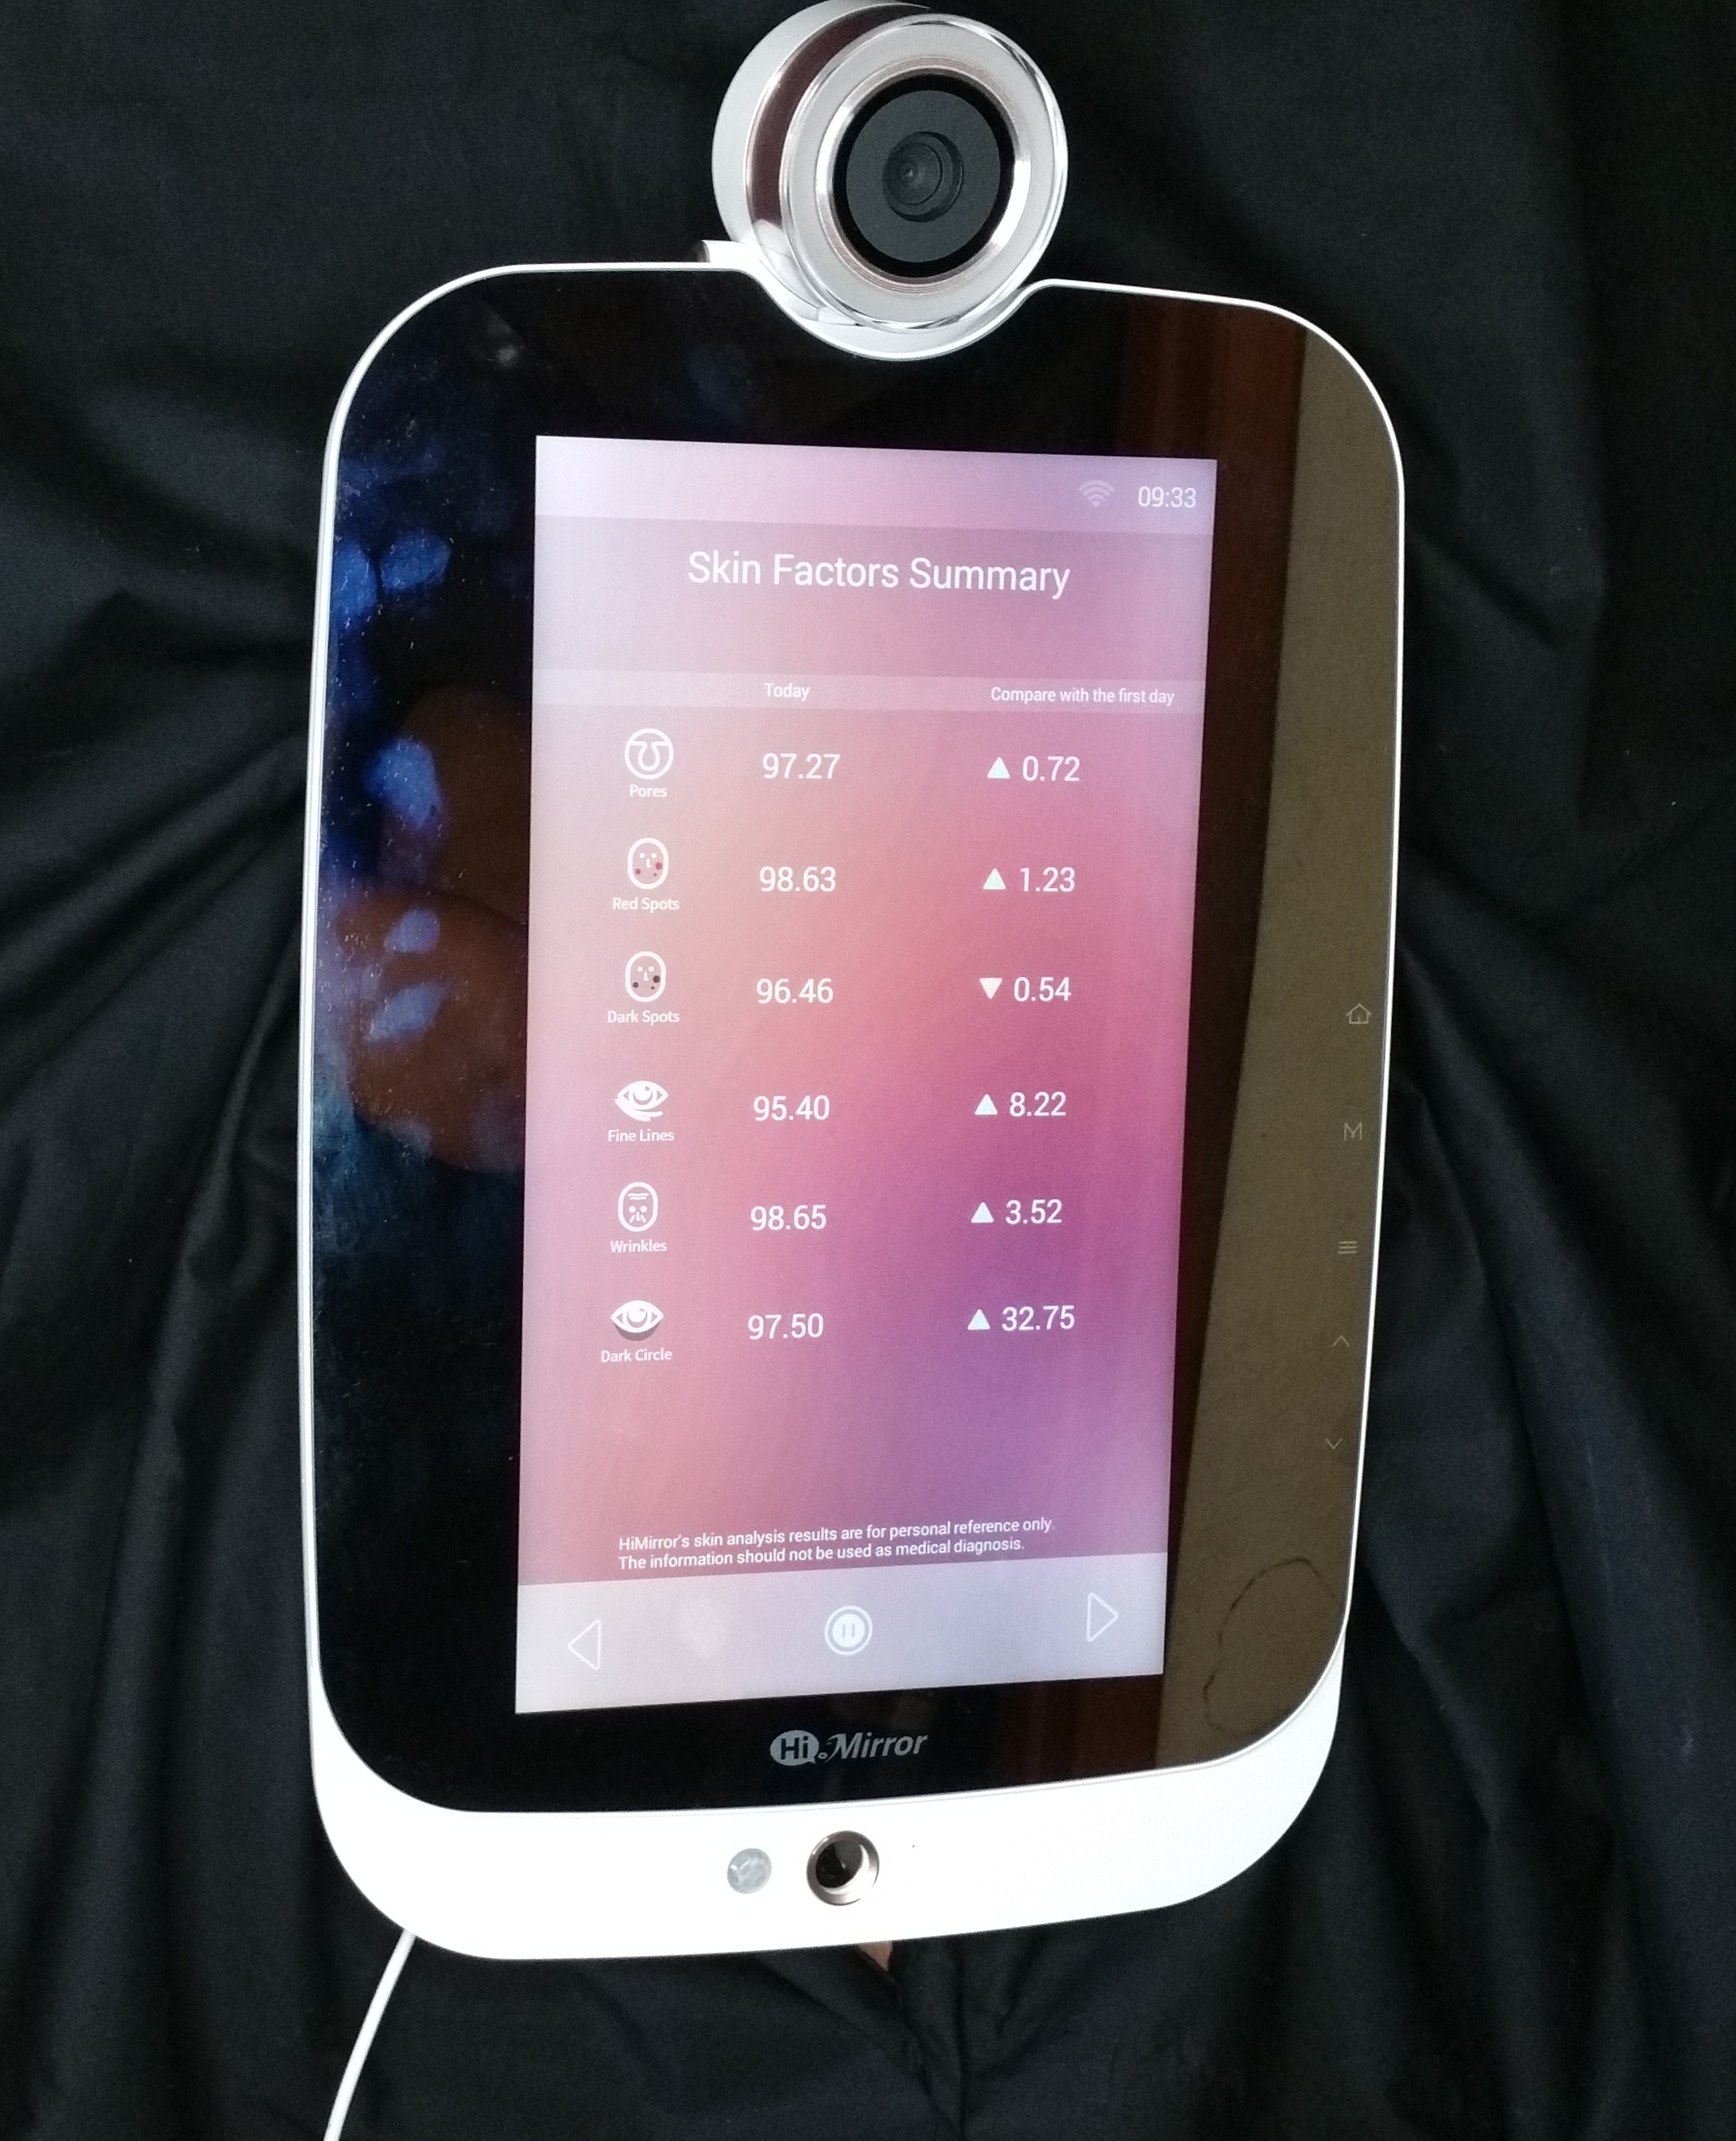 himirror, technology, beauty, mirror, skin analyzer, skin technology, technology, skin care, beauty tech, tech, review, demo,